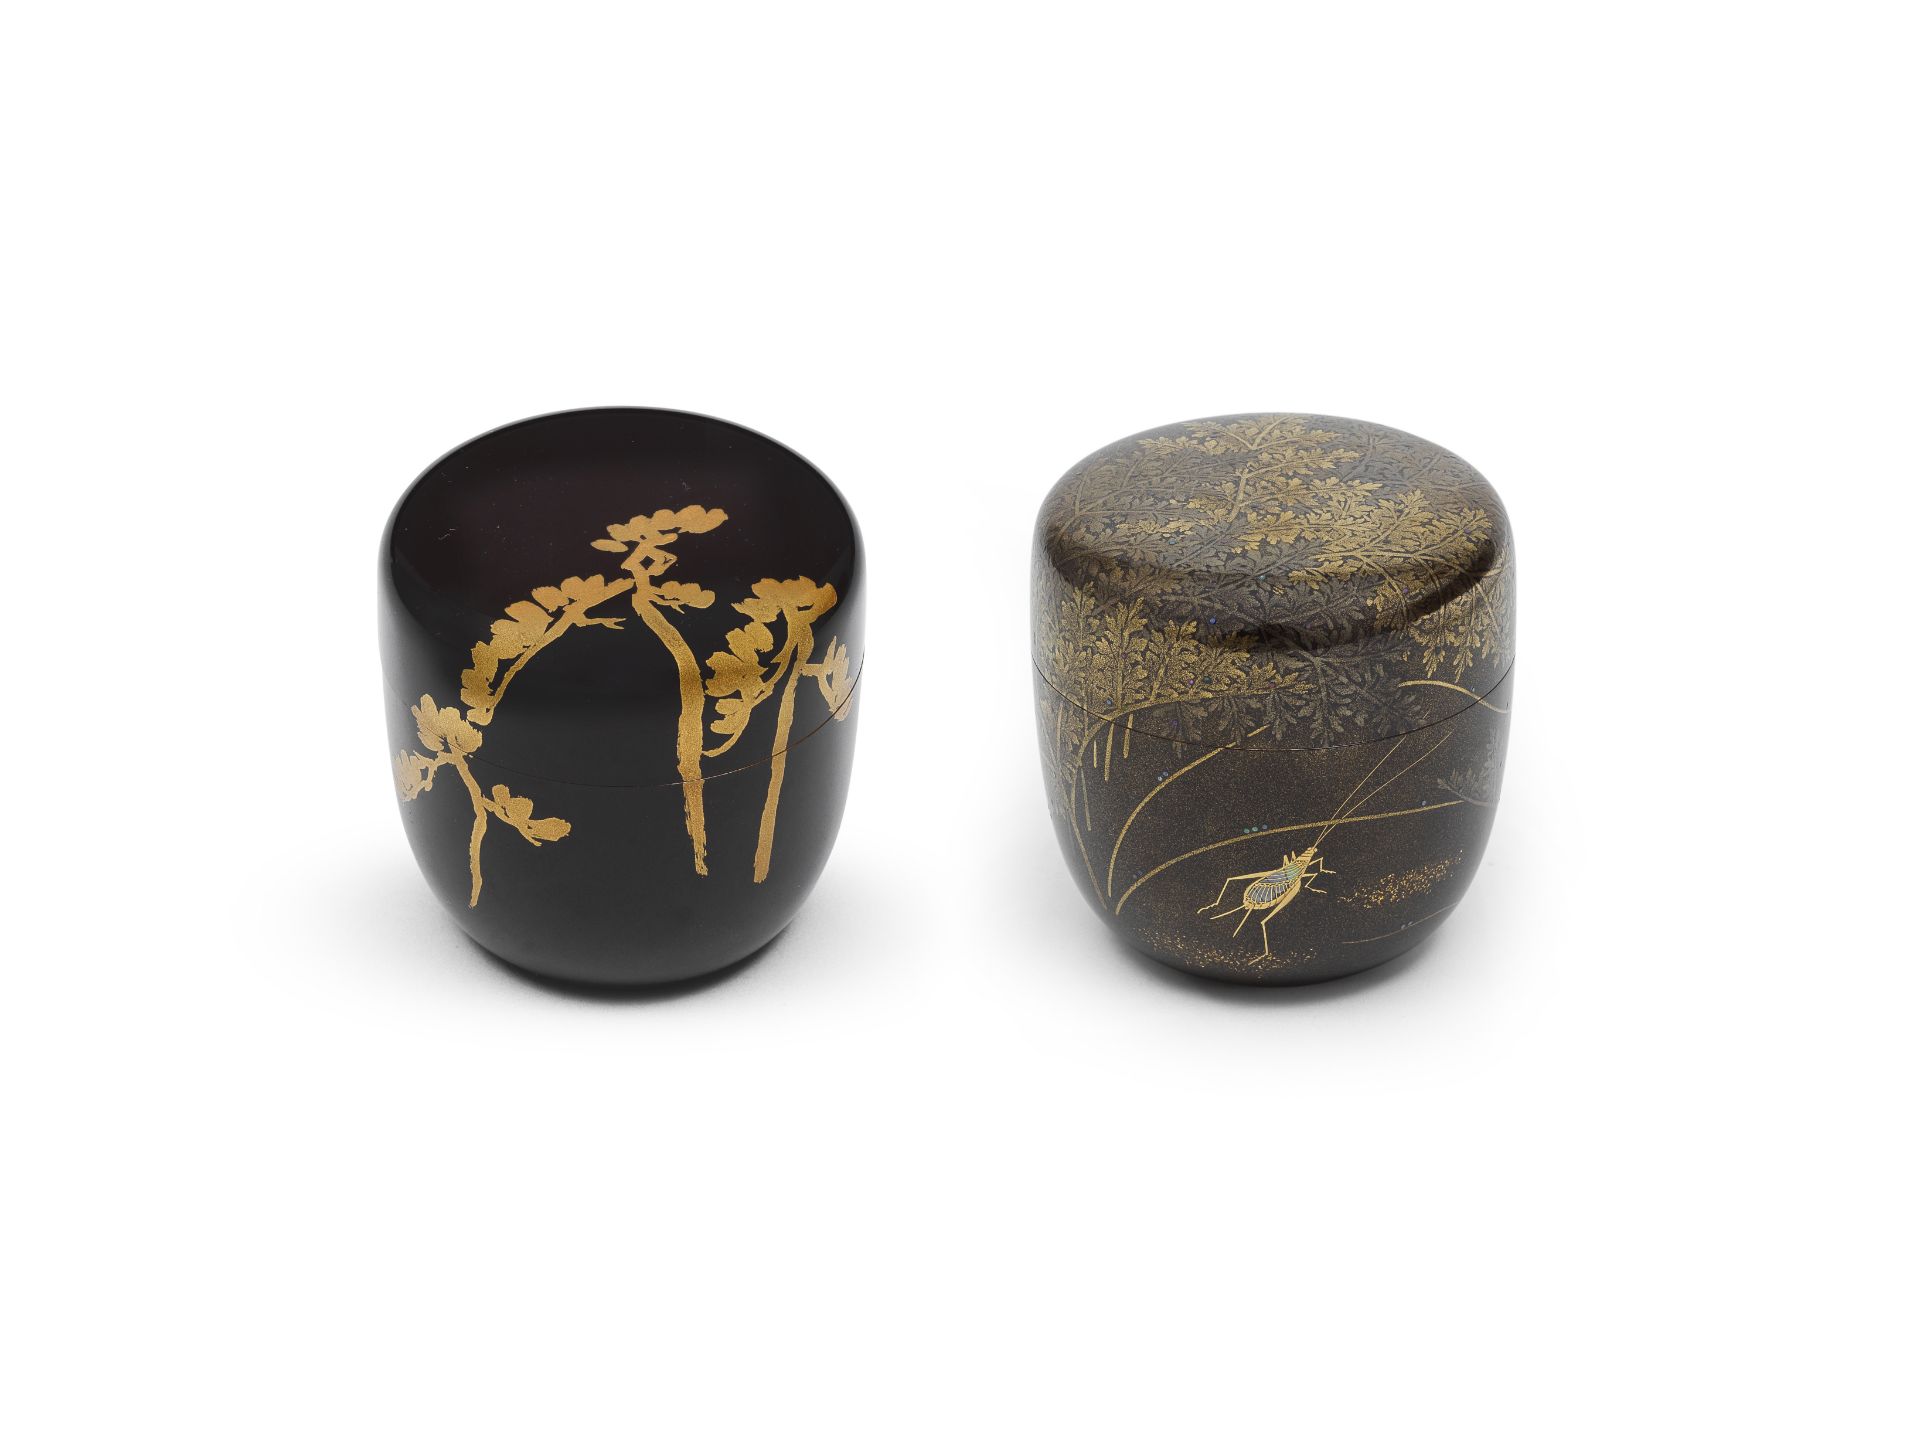 ONE BY SHINSAI (DATES UNKNOWN) AND ONE BY UCHIDA SOKAN (1883-1984) Two Lacquer Natsume (Tea Cadd...